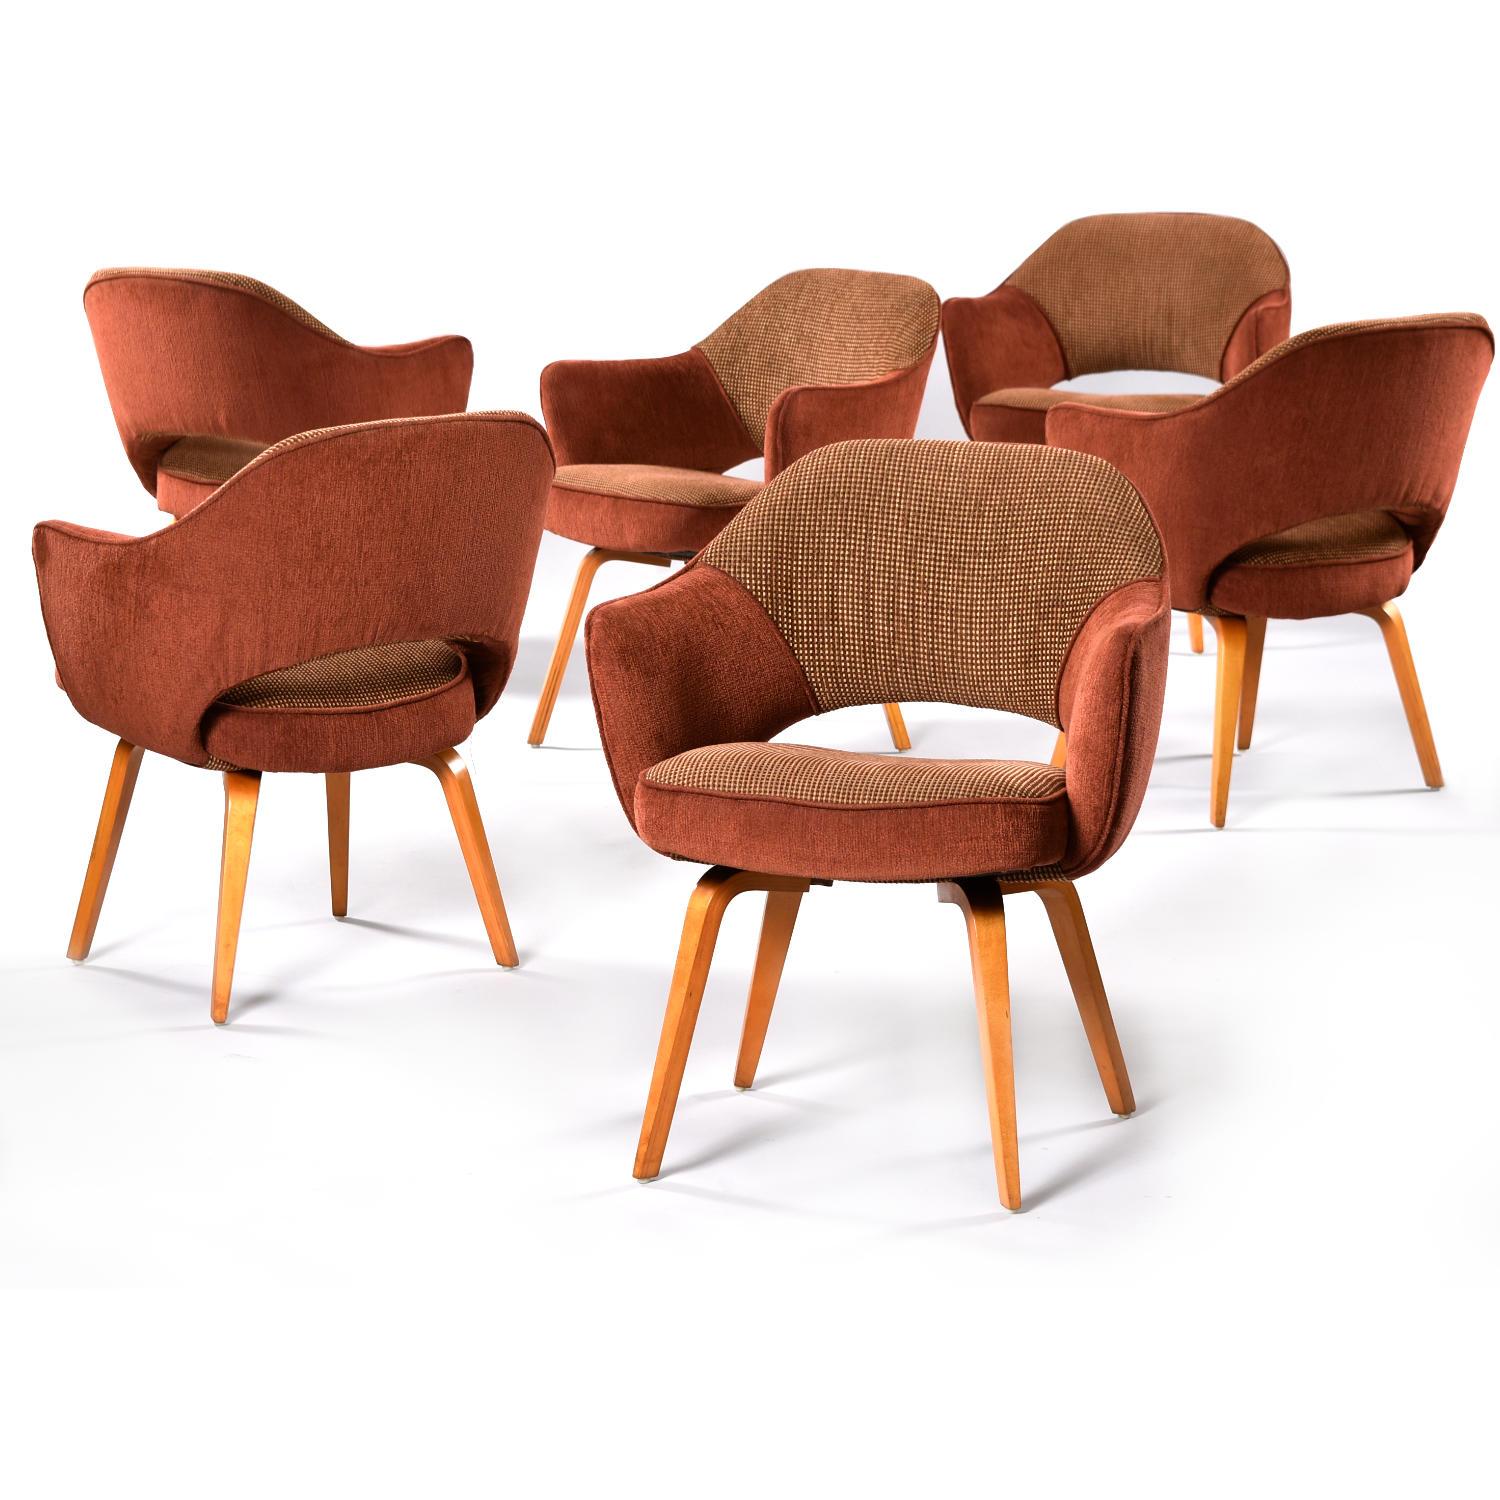 We have (10) total available so inquire if you need more than (6). 

Set of six vintage Saarinen for Knoll executive armchairs. These chairs come in variety of iterations, but I think we have a winning combo here. Our group of Saarinen chairs